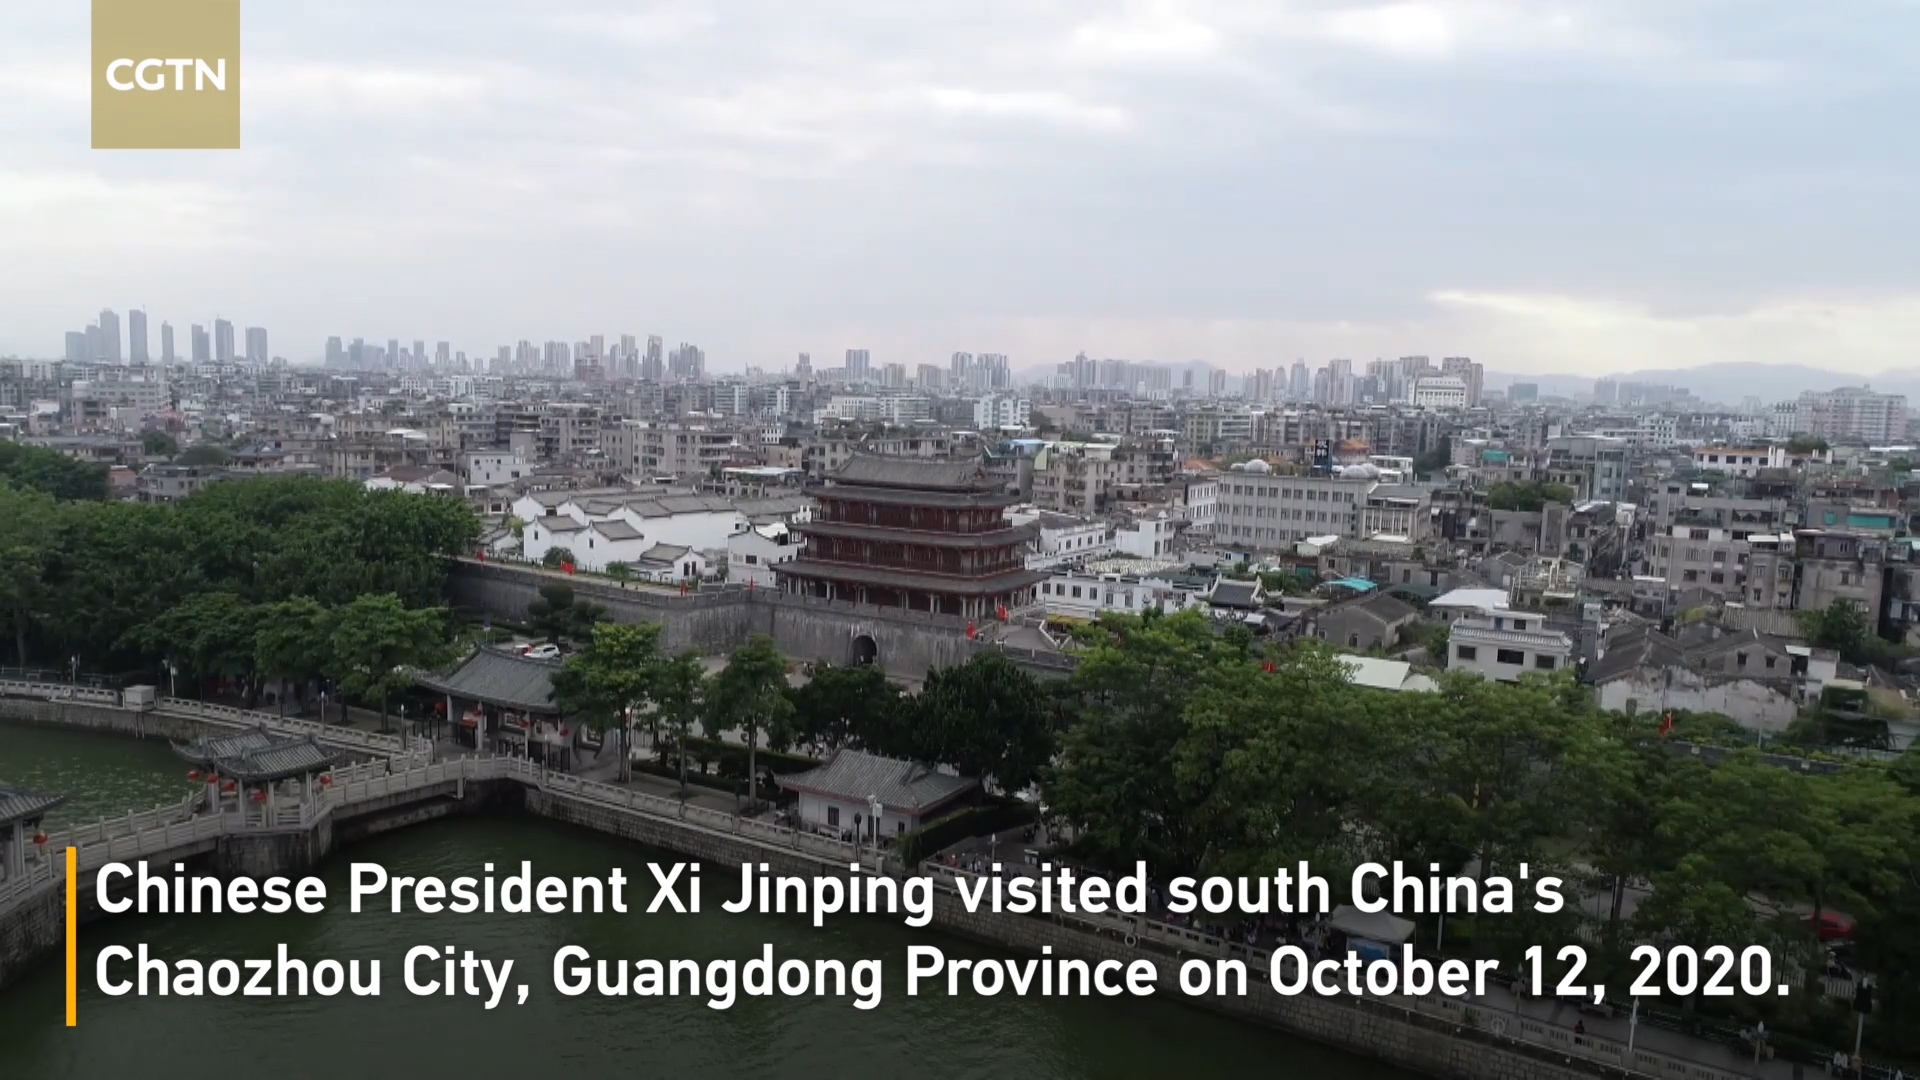 CGTN: 'Reform and Opening-Up' Remains Theme of Xi Jinping's Visit to China's Guangdong Province